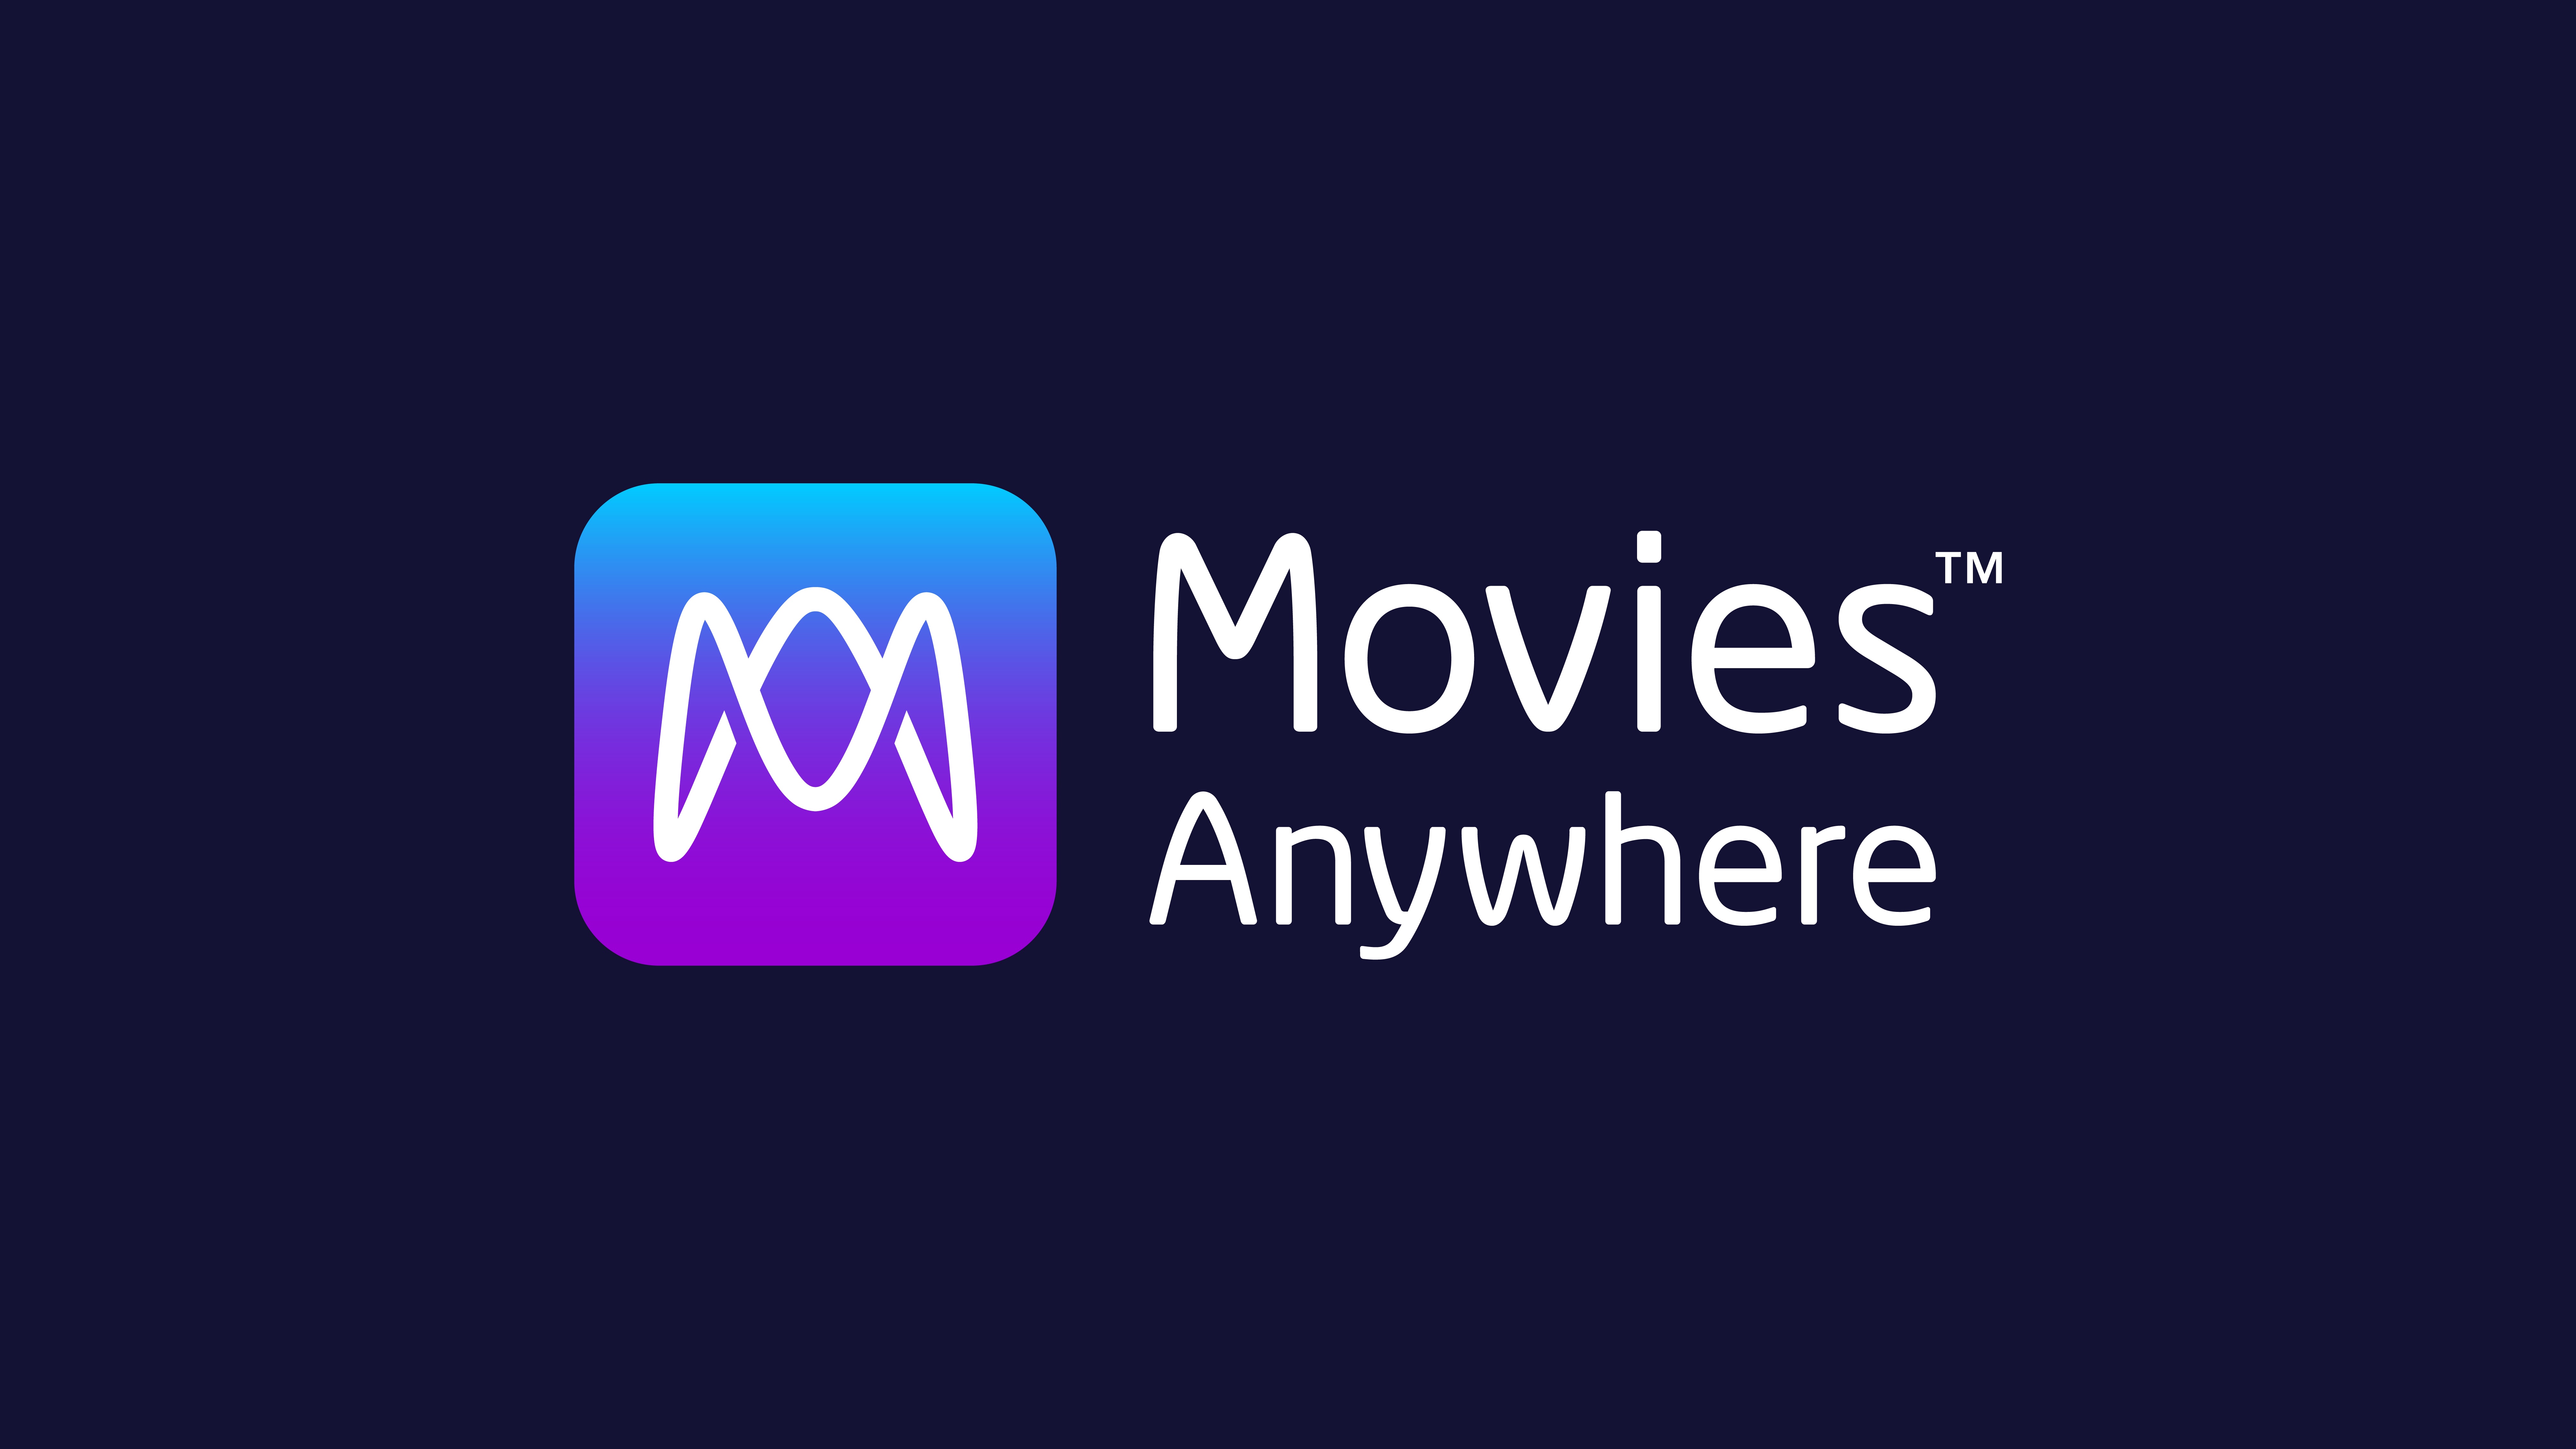 Movies Anywhere App Launches ‘My List’ Feature that will Automatically Organize Your Content